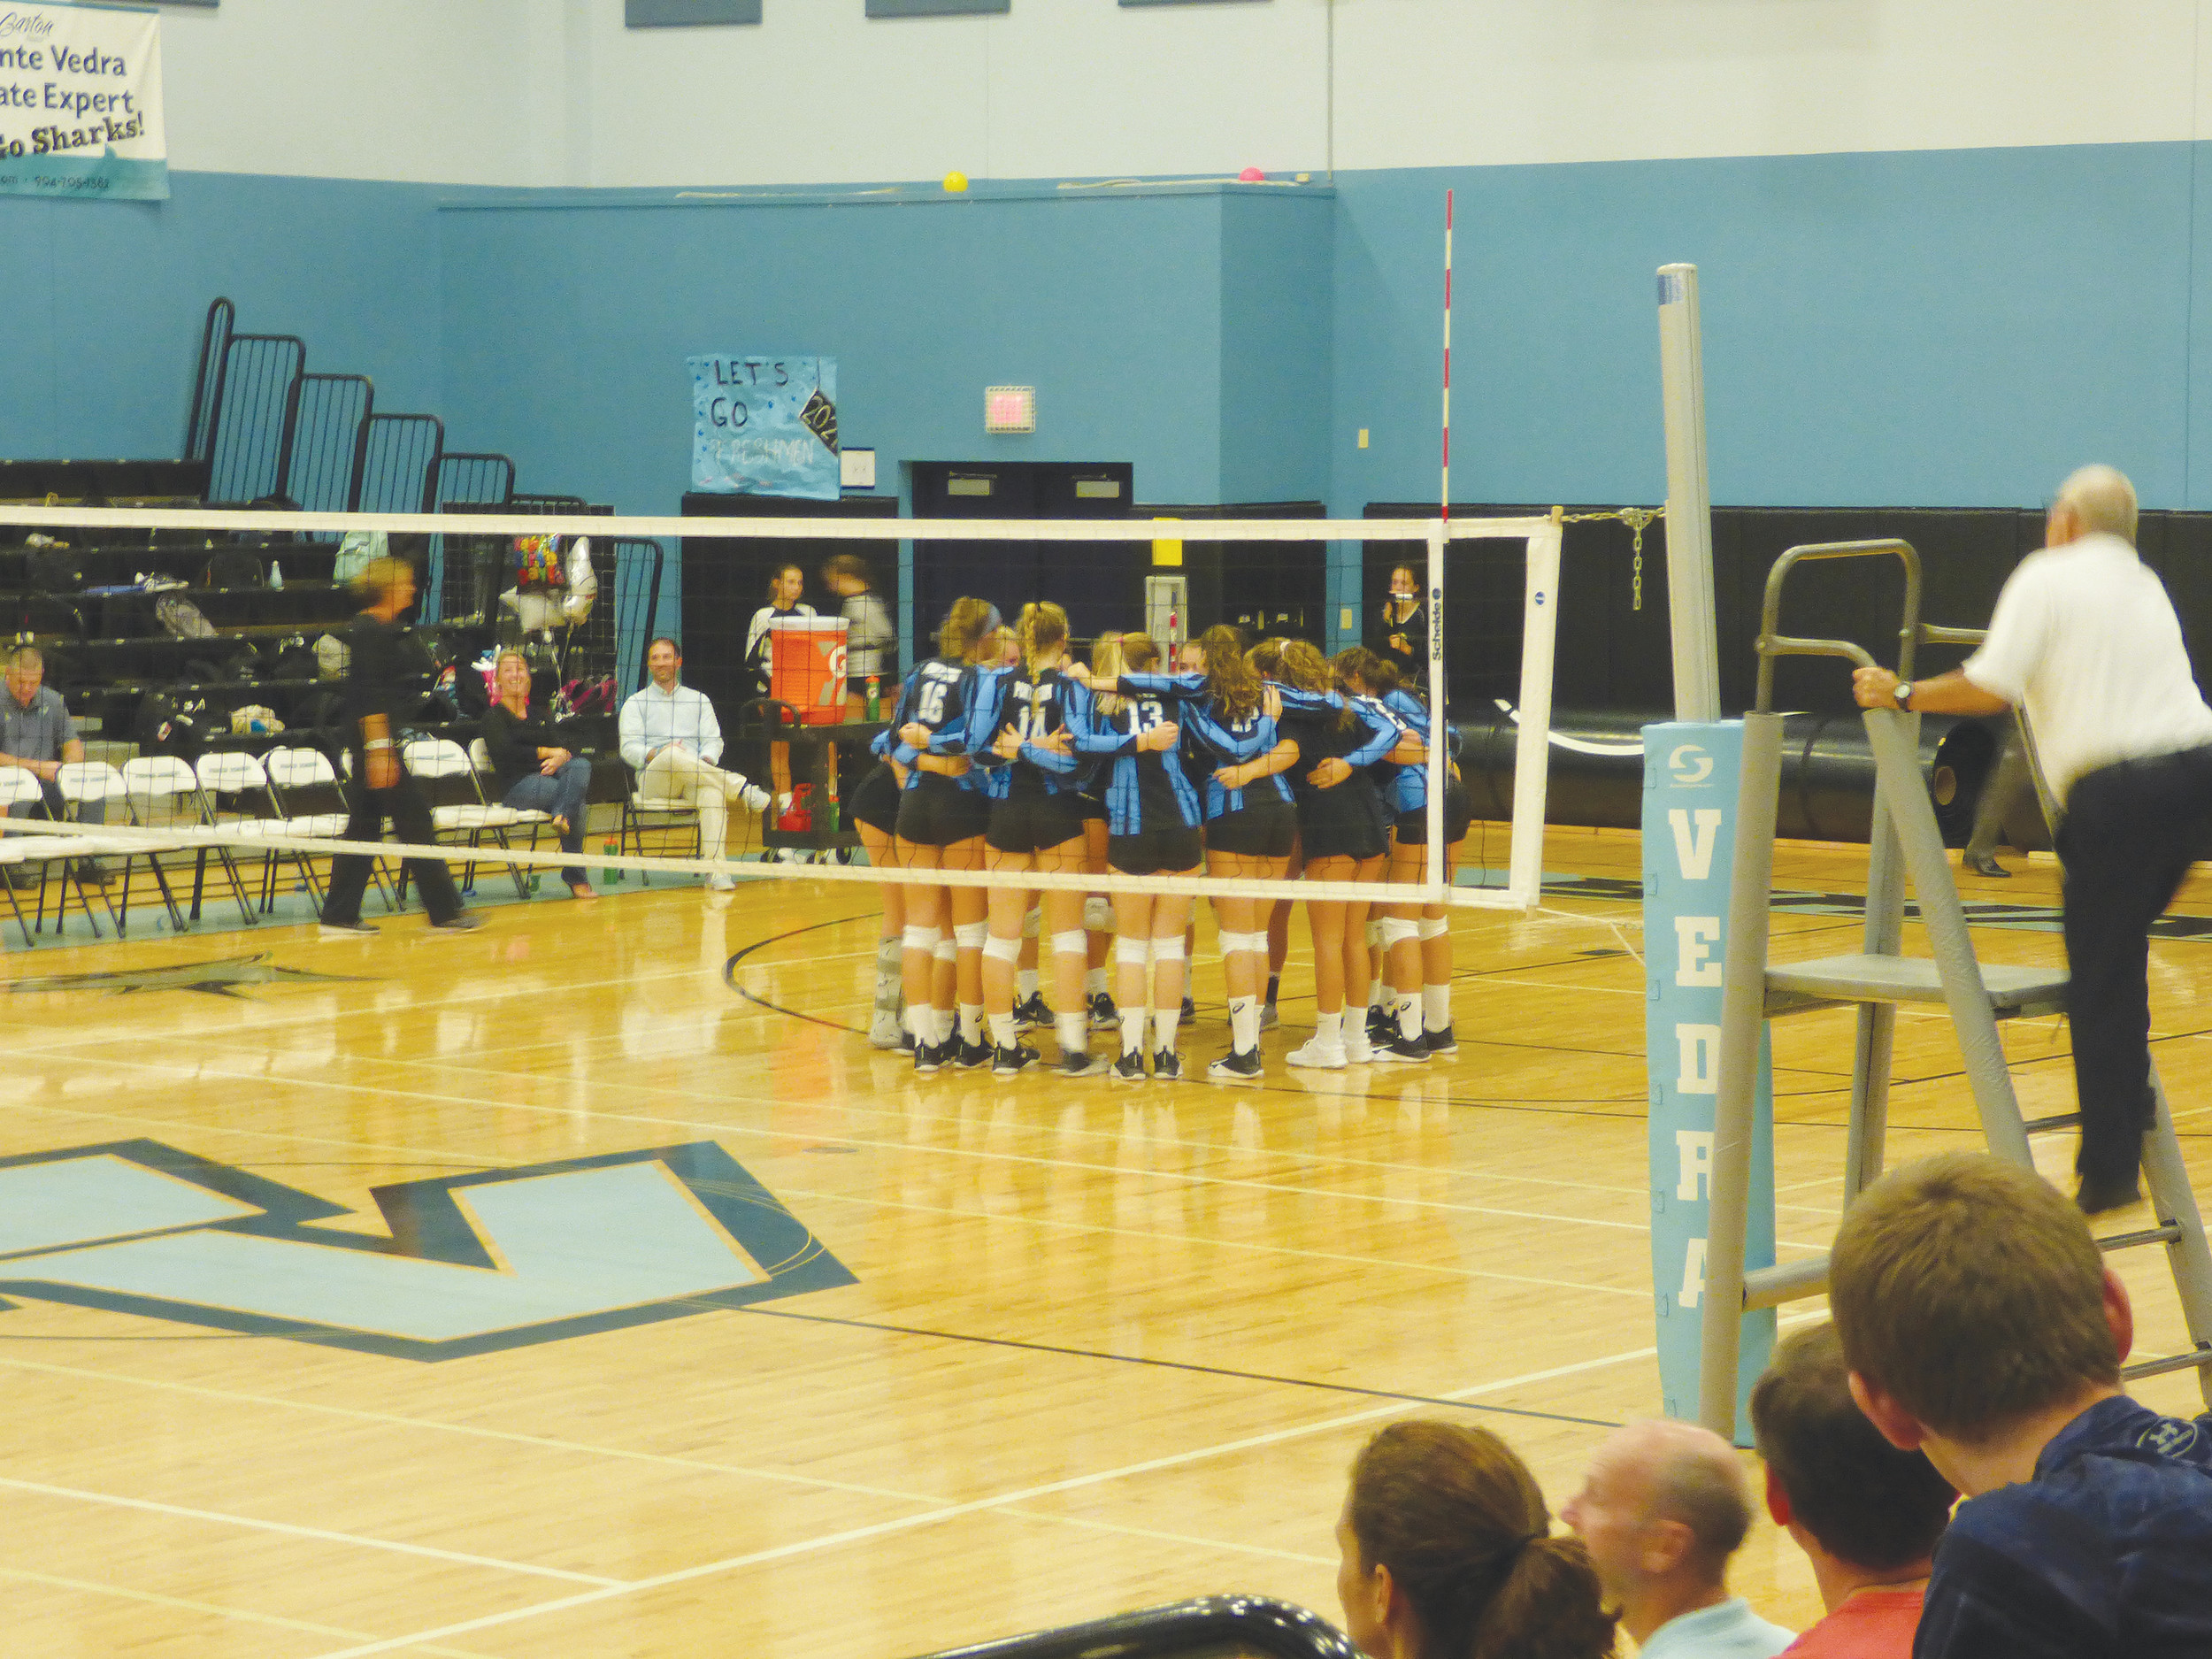 On Aug. 24, the Ponte Vedra High School girls’ varsity volleyball team defeated Nease High School in the first game of the season. Ponte Vedra won three games straight, making for a quick match. The first game was led by starters Paige Johnson, Ashley Schur, Eve Beech, Gabrielle Keller, Savannah Fowler and Ava Rambo. They worked together on several kills and finished 25-16. The next two games were just as painless for the Sharks, 25-13 and 25-16.